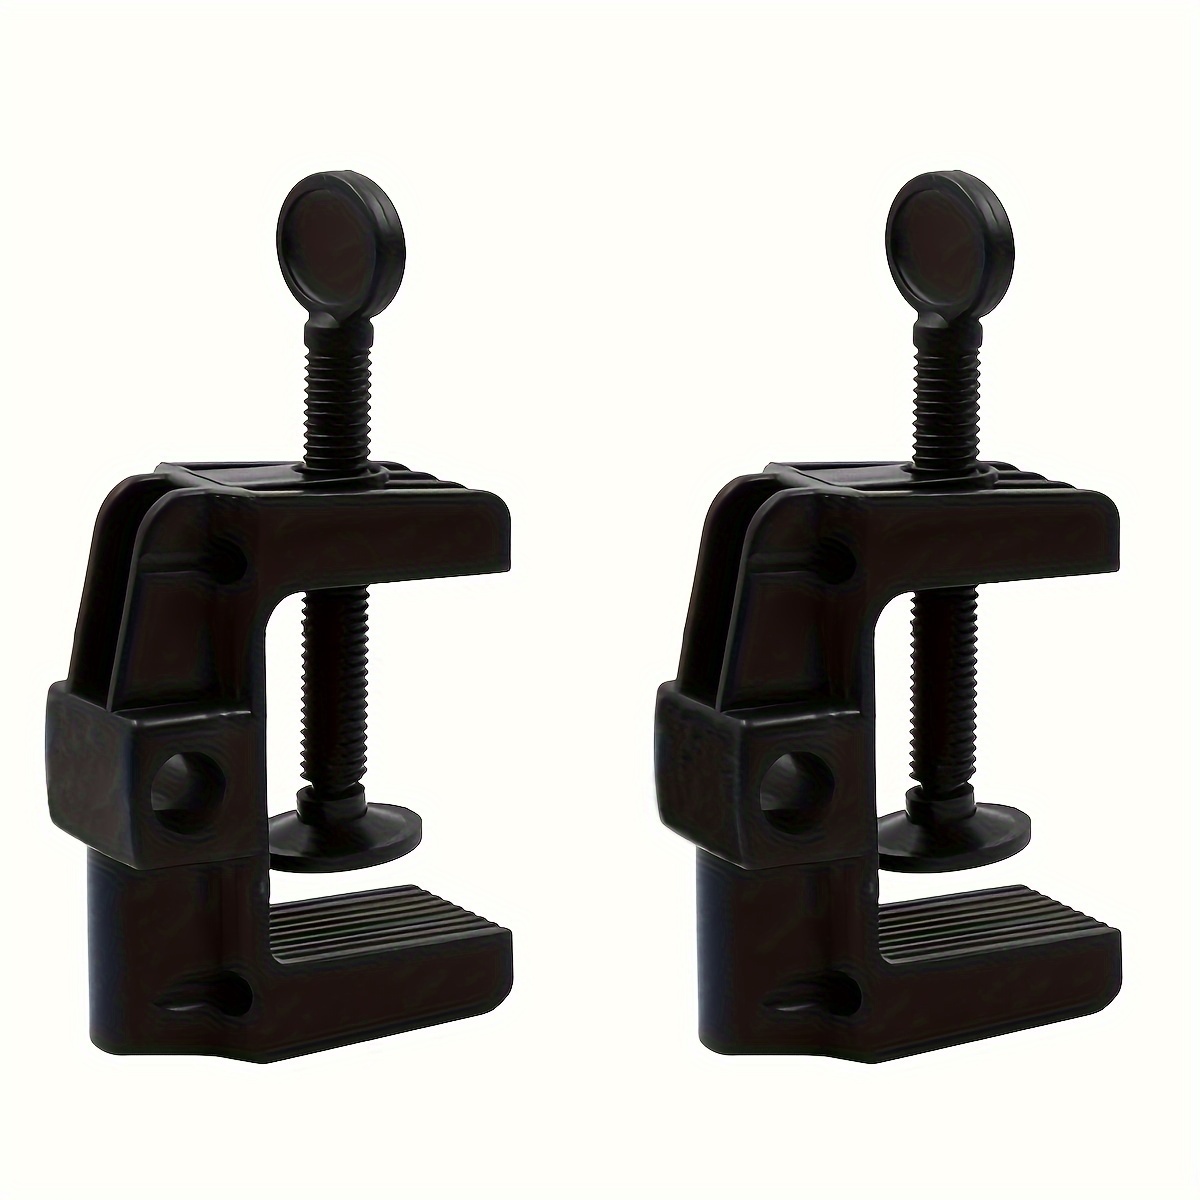 

1pc/2pcs Universal C-clamp Support Clamp Desktop Mount Holder Stand With 1/4" And 3/8" Thread Black